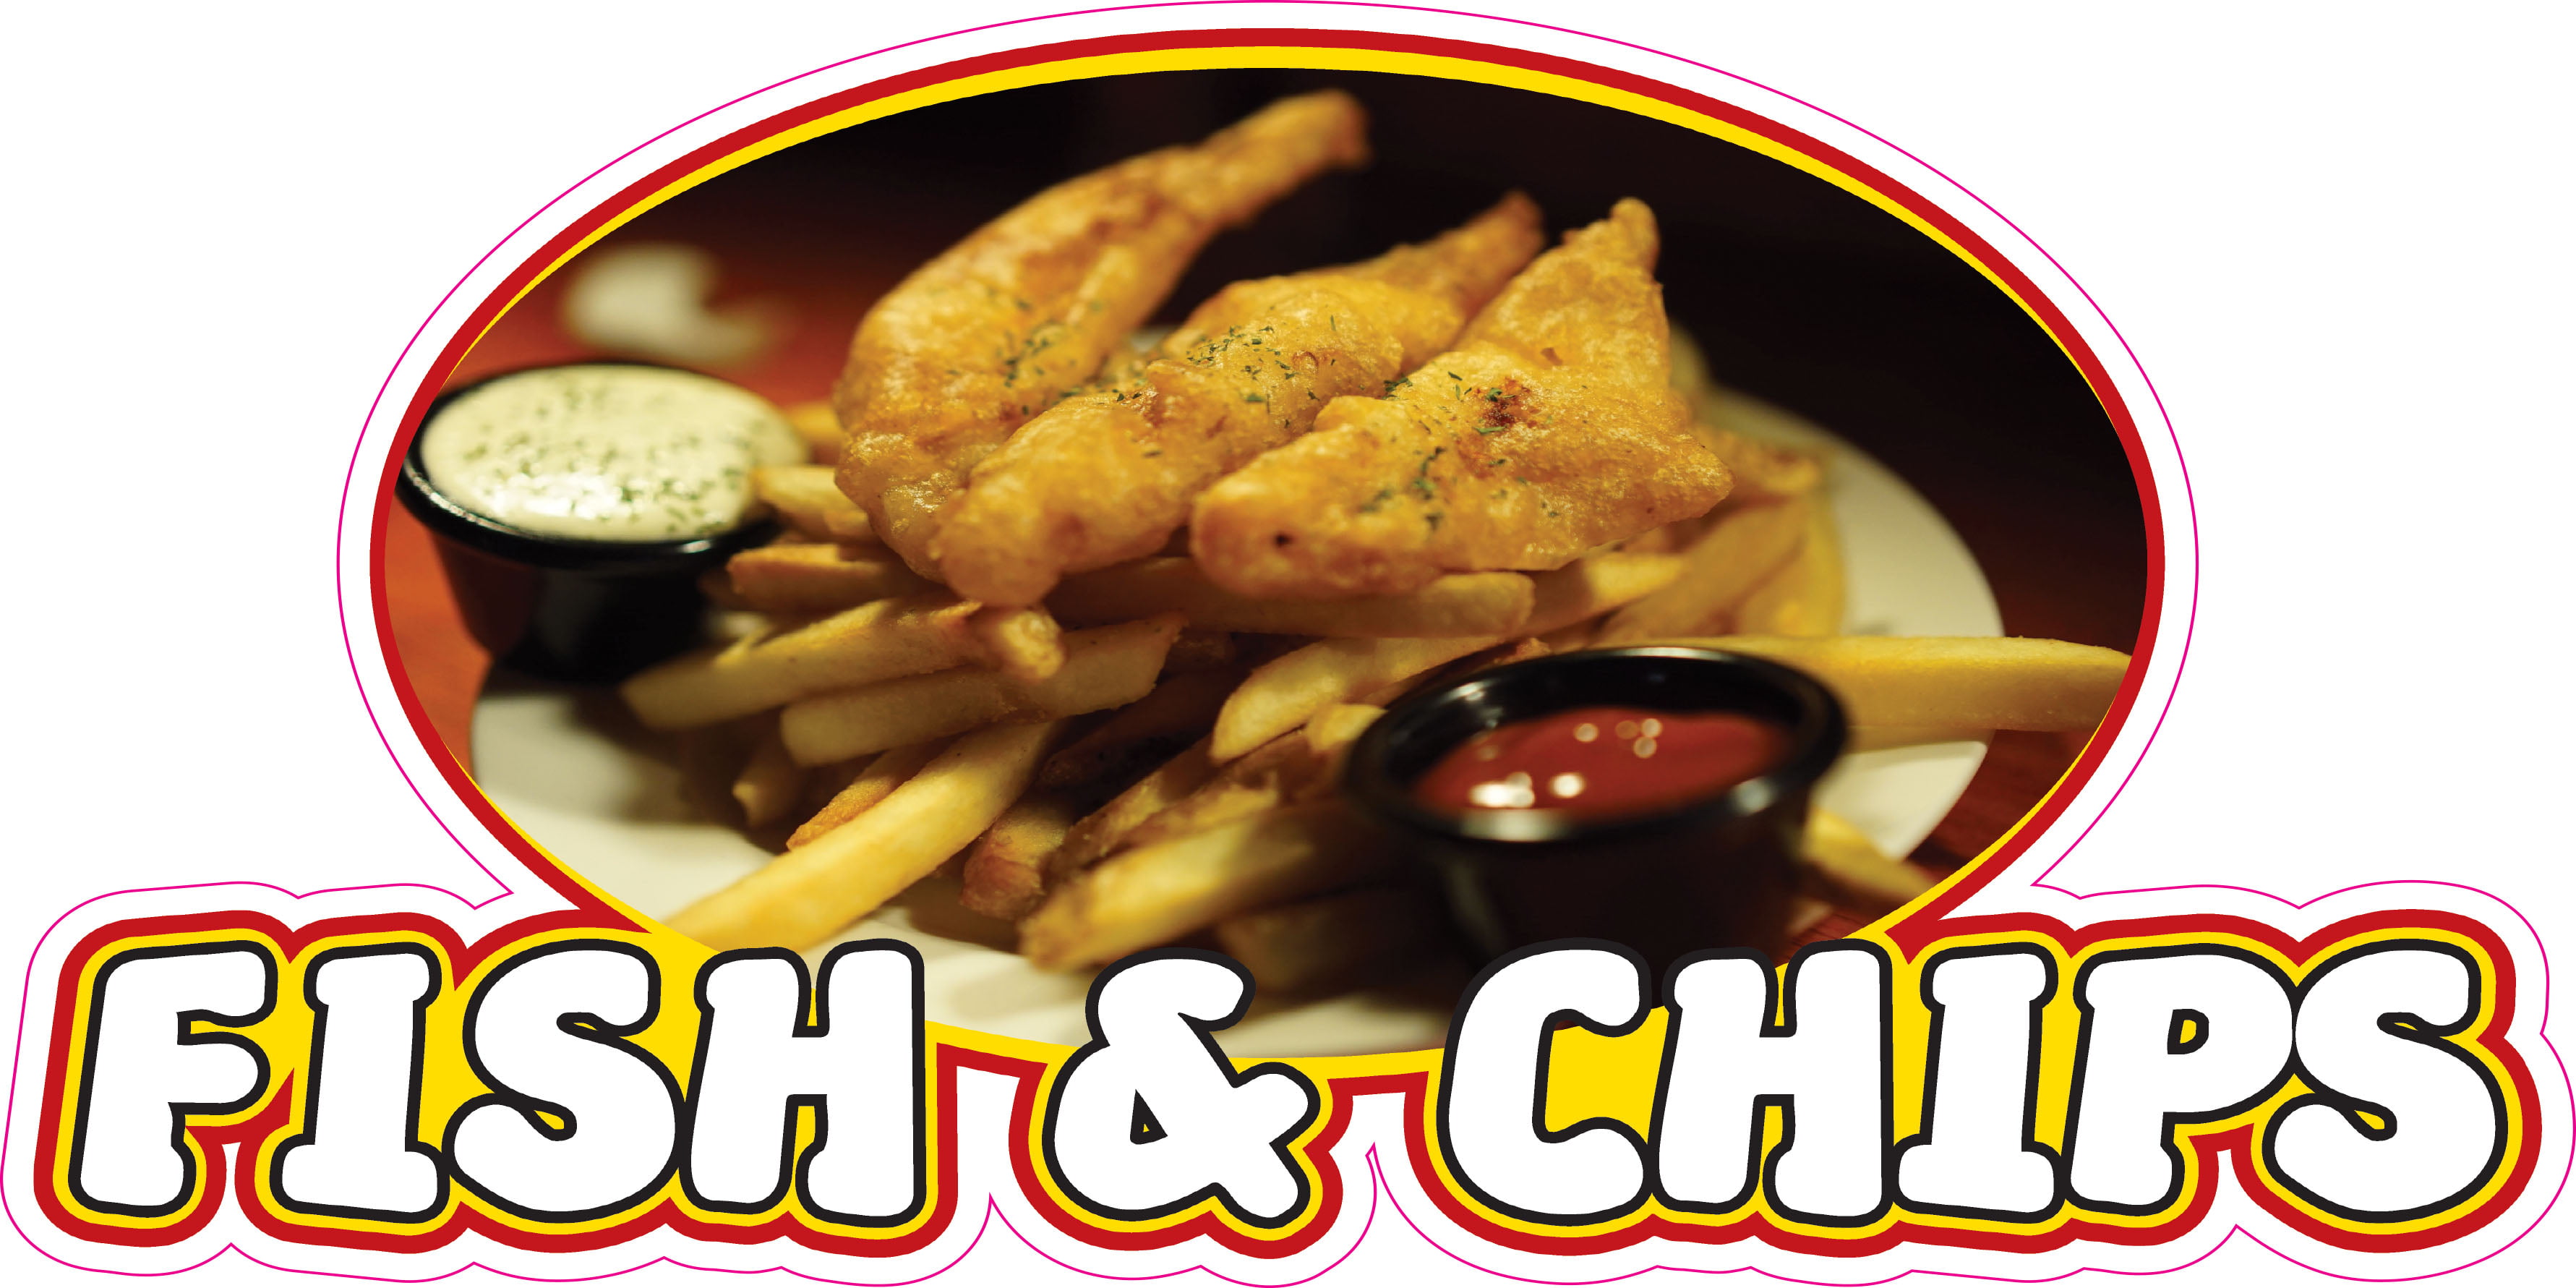 Details about   Roasted Chicken w/Fries DECAL Choose Your Size Food Truck Concession Sticker 